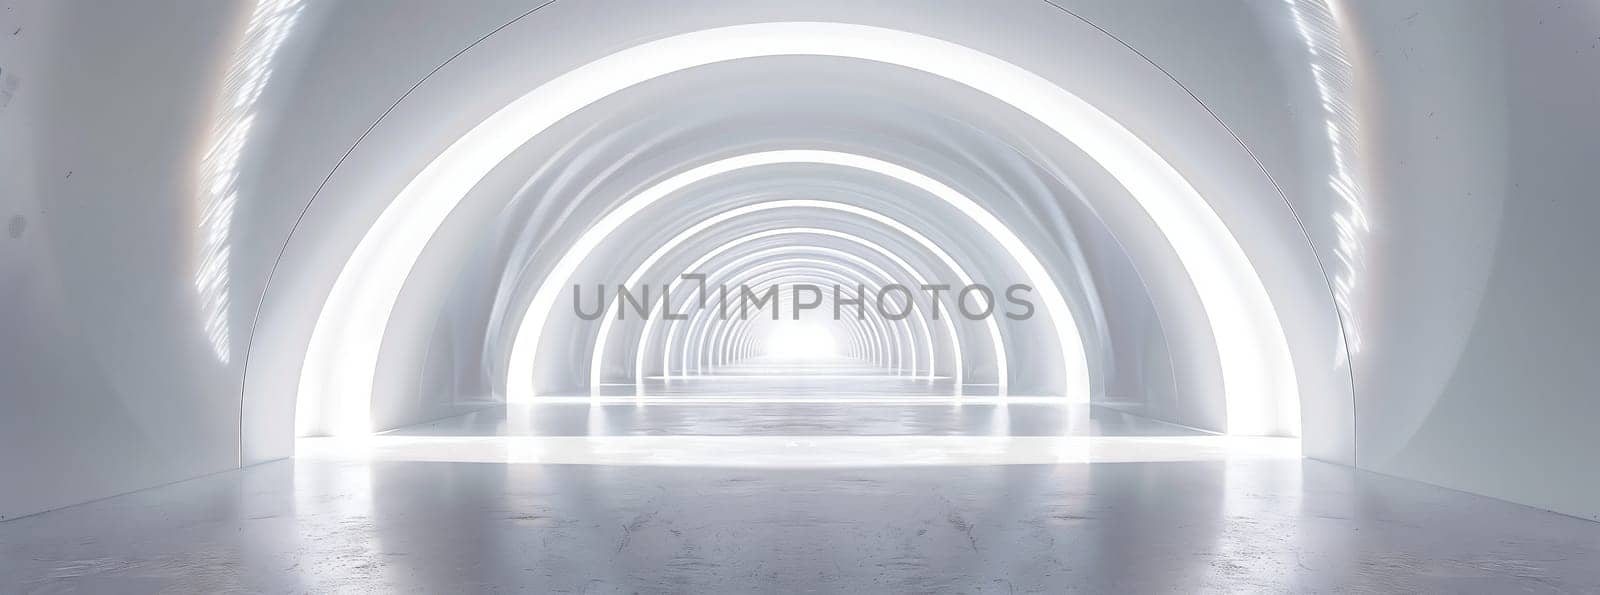 A gasfilled white tunnel with a symmetrical pattern on the ceiling leading to a bright light at the end, reminiscent of an art piece in monochrome photography